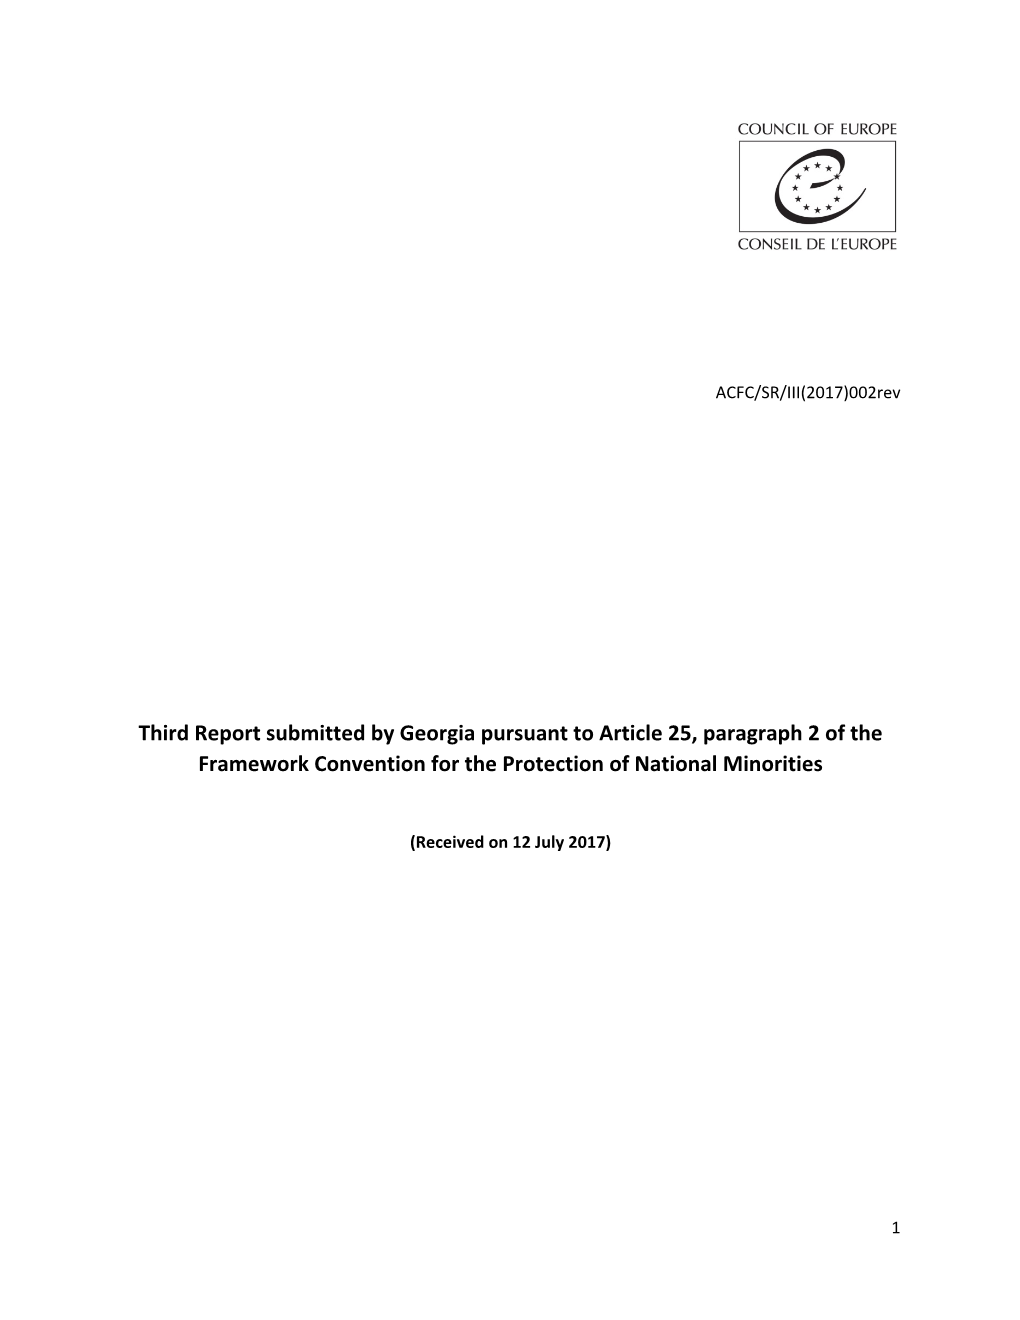 Third Report Submitted by Georgia Pursuant to Article 25, Paragraph 2 of the Framework Convention for the Protection of National Minorities